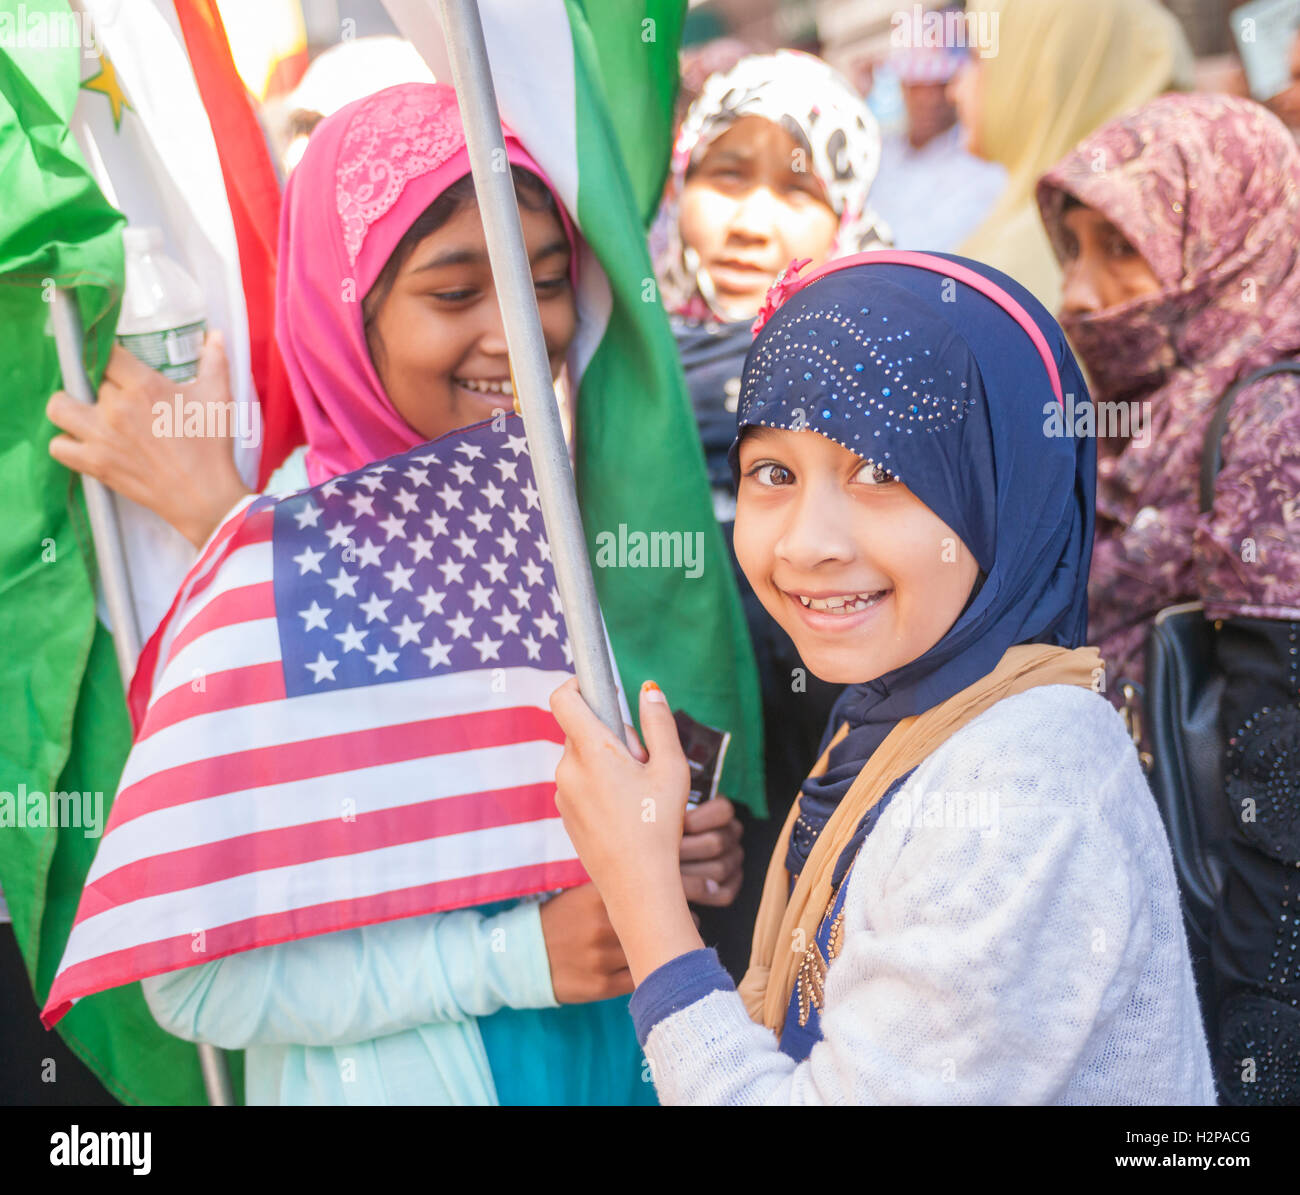 Muslims from the tri-state area gather on Madison Avenue  in New York on Sunday, September 25, 2016 for the American Muslim Parade. The annual parade, now in it's 31st year, celebrates the diversity and heritage of Islamic culture. Participants march down Madison Avenue ending in a street fair. (© Richard B. Levine) Stock Photo